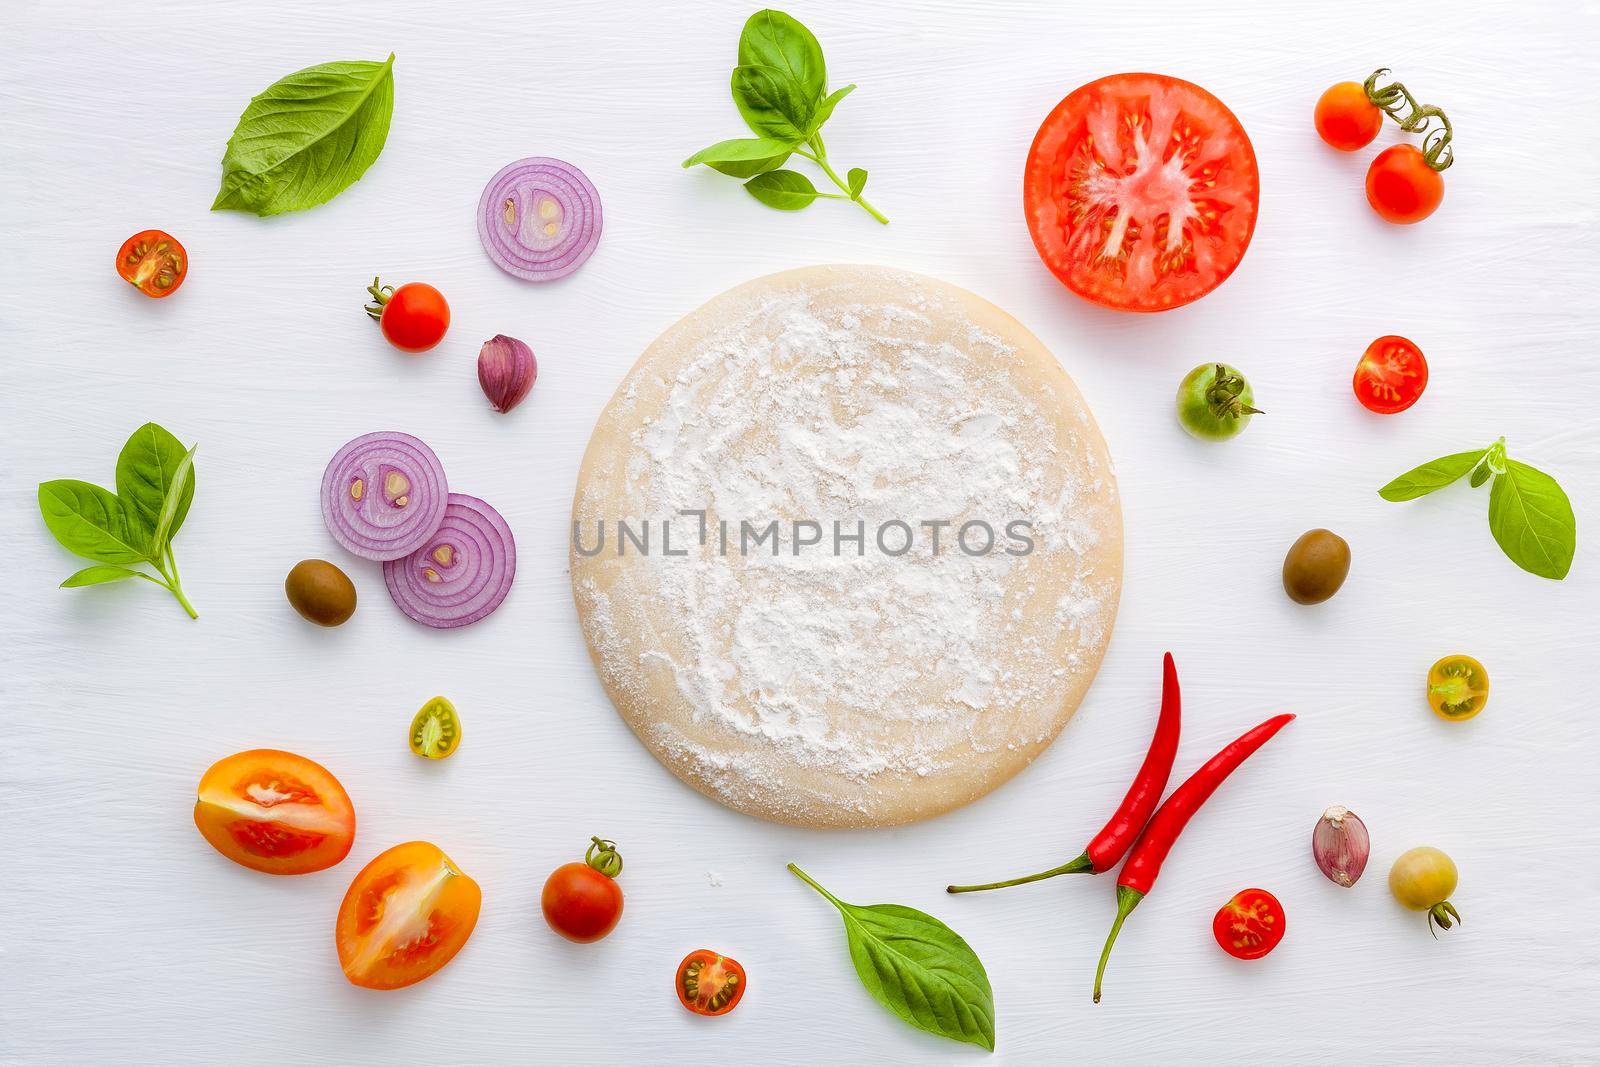 The ingredients for homemade pizza on white wooden background. by kerdkanno